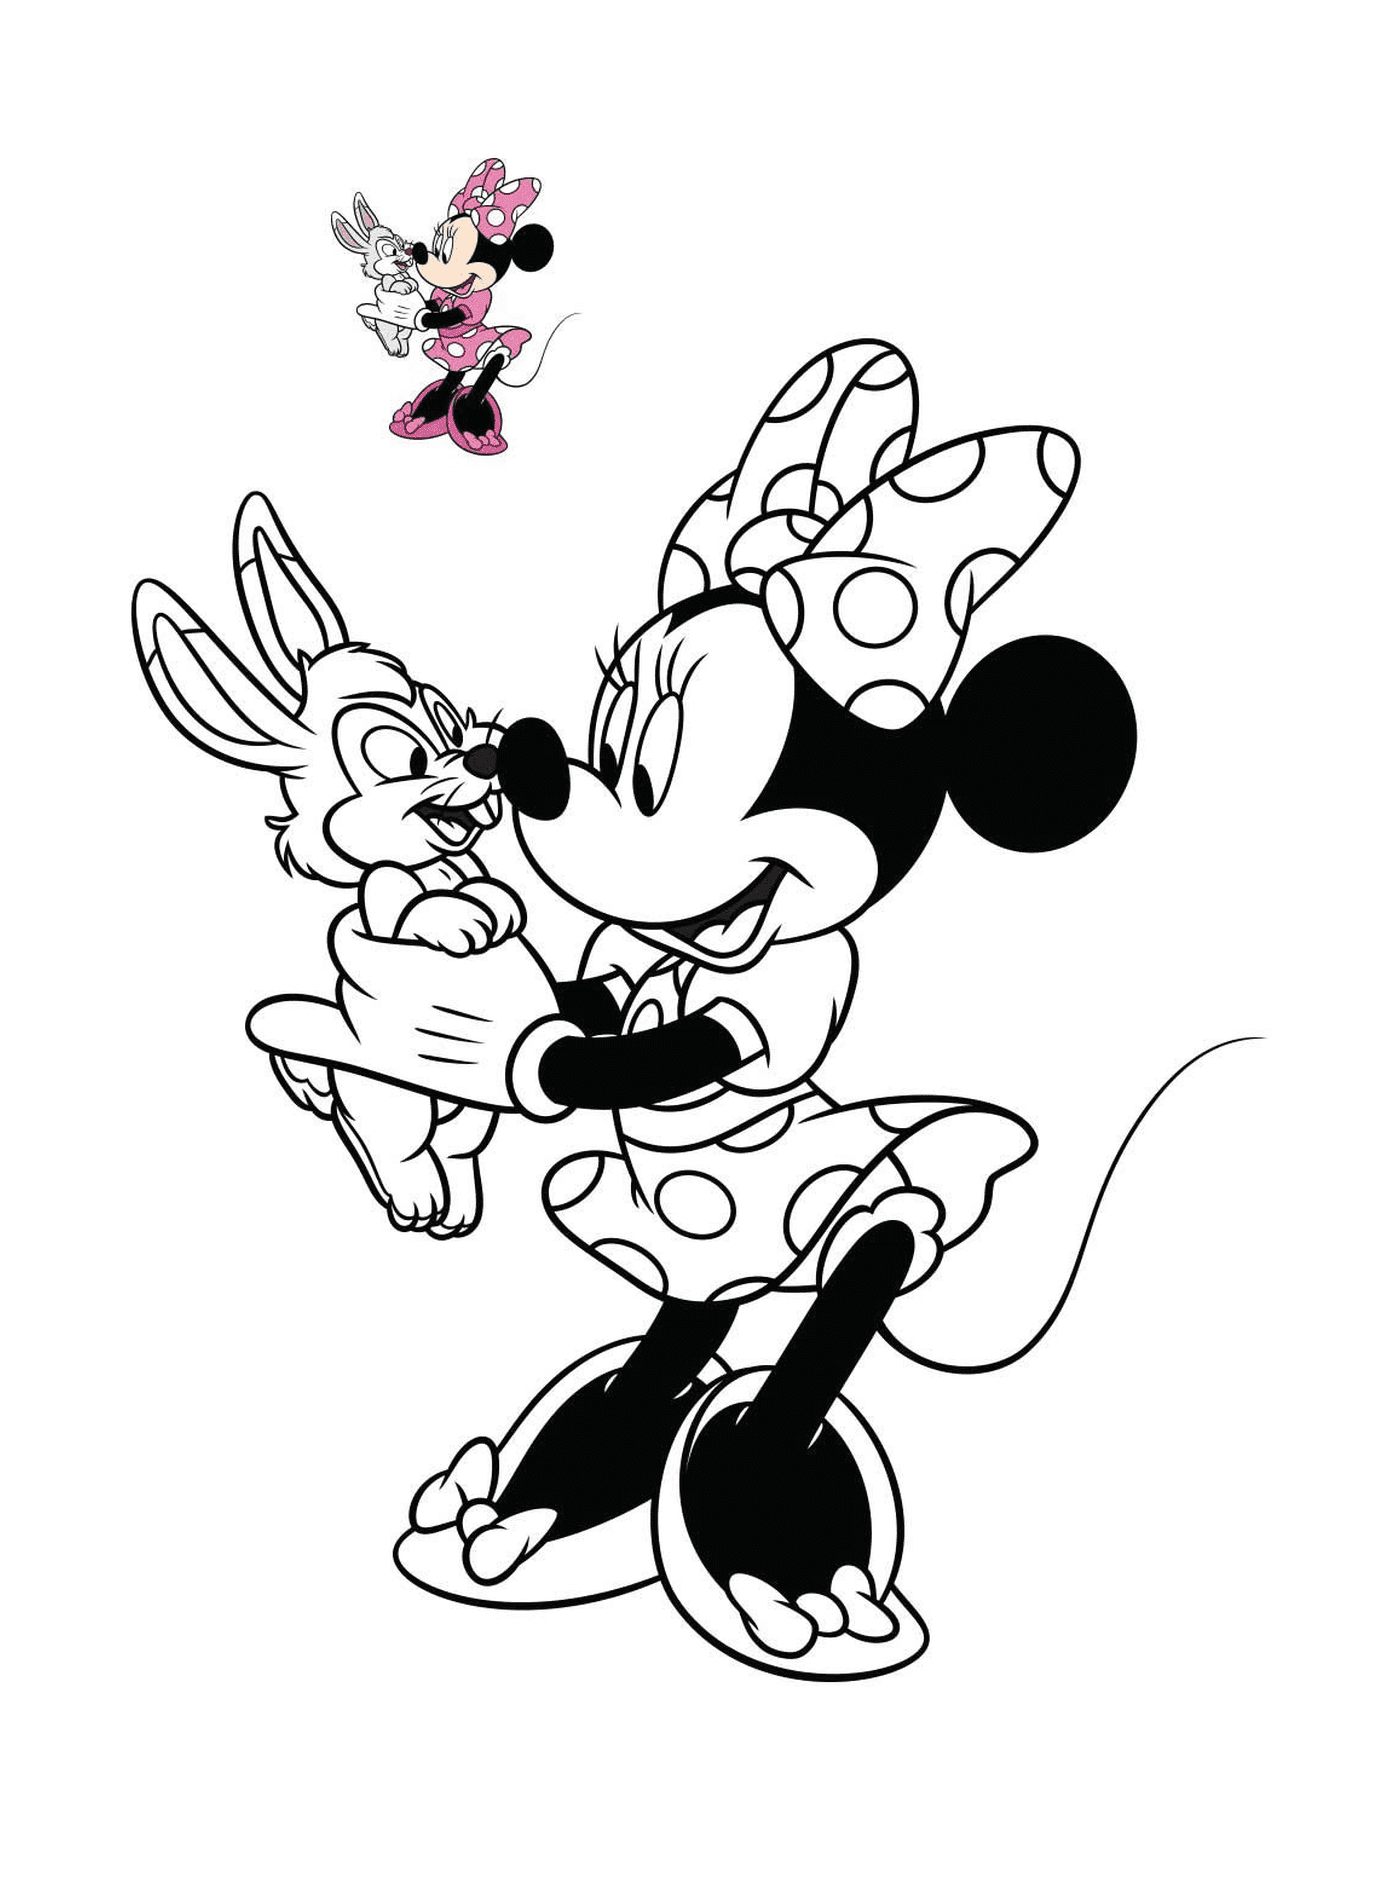  Minnie Mouse holds a rabbit in her hands 